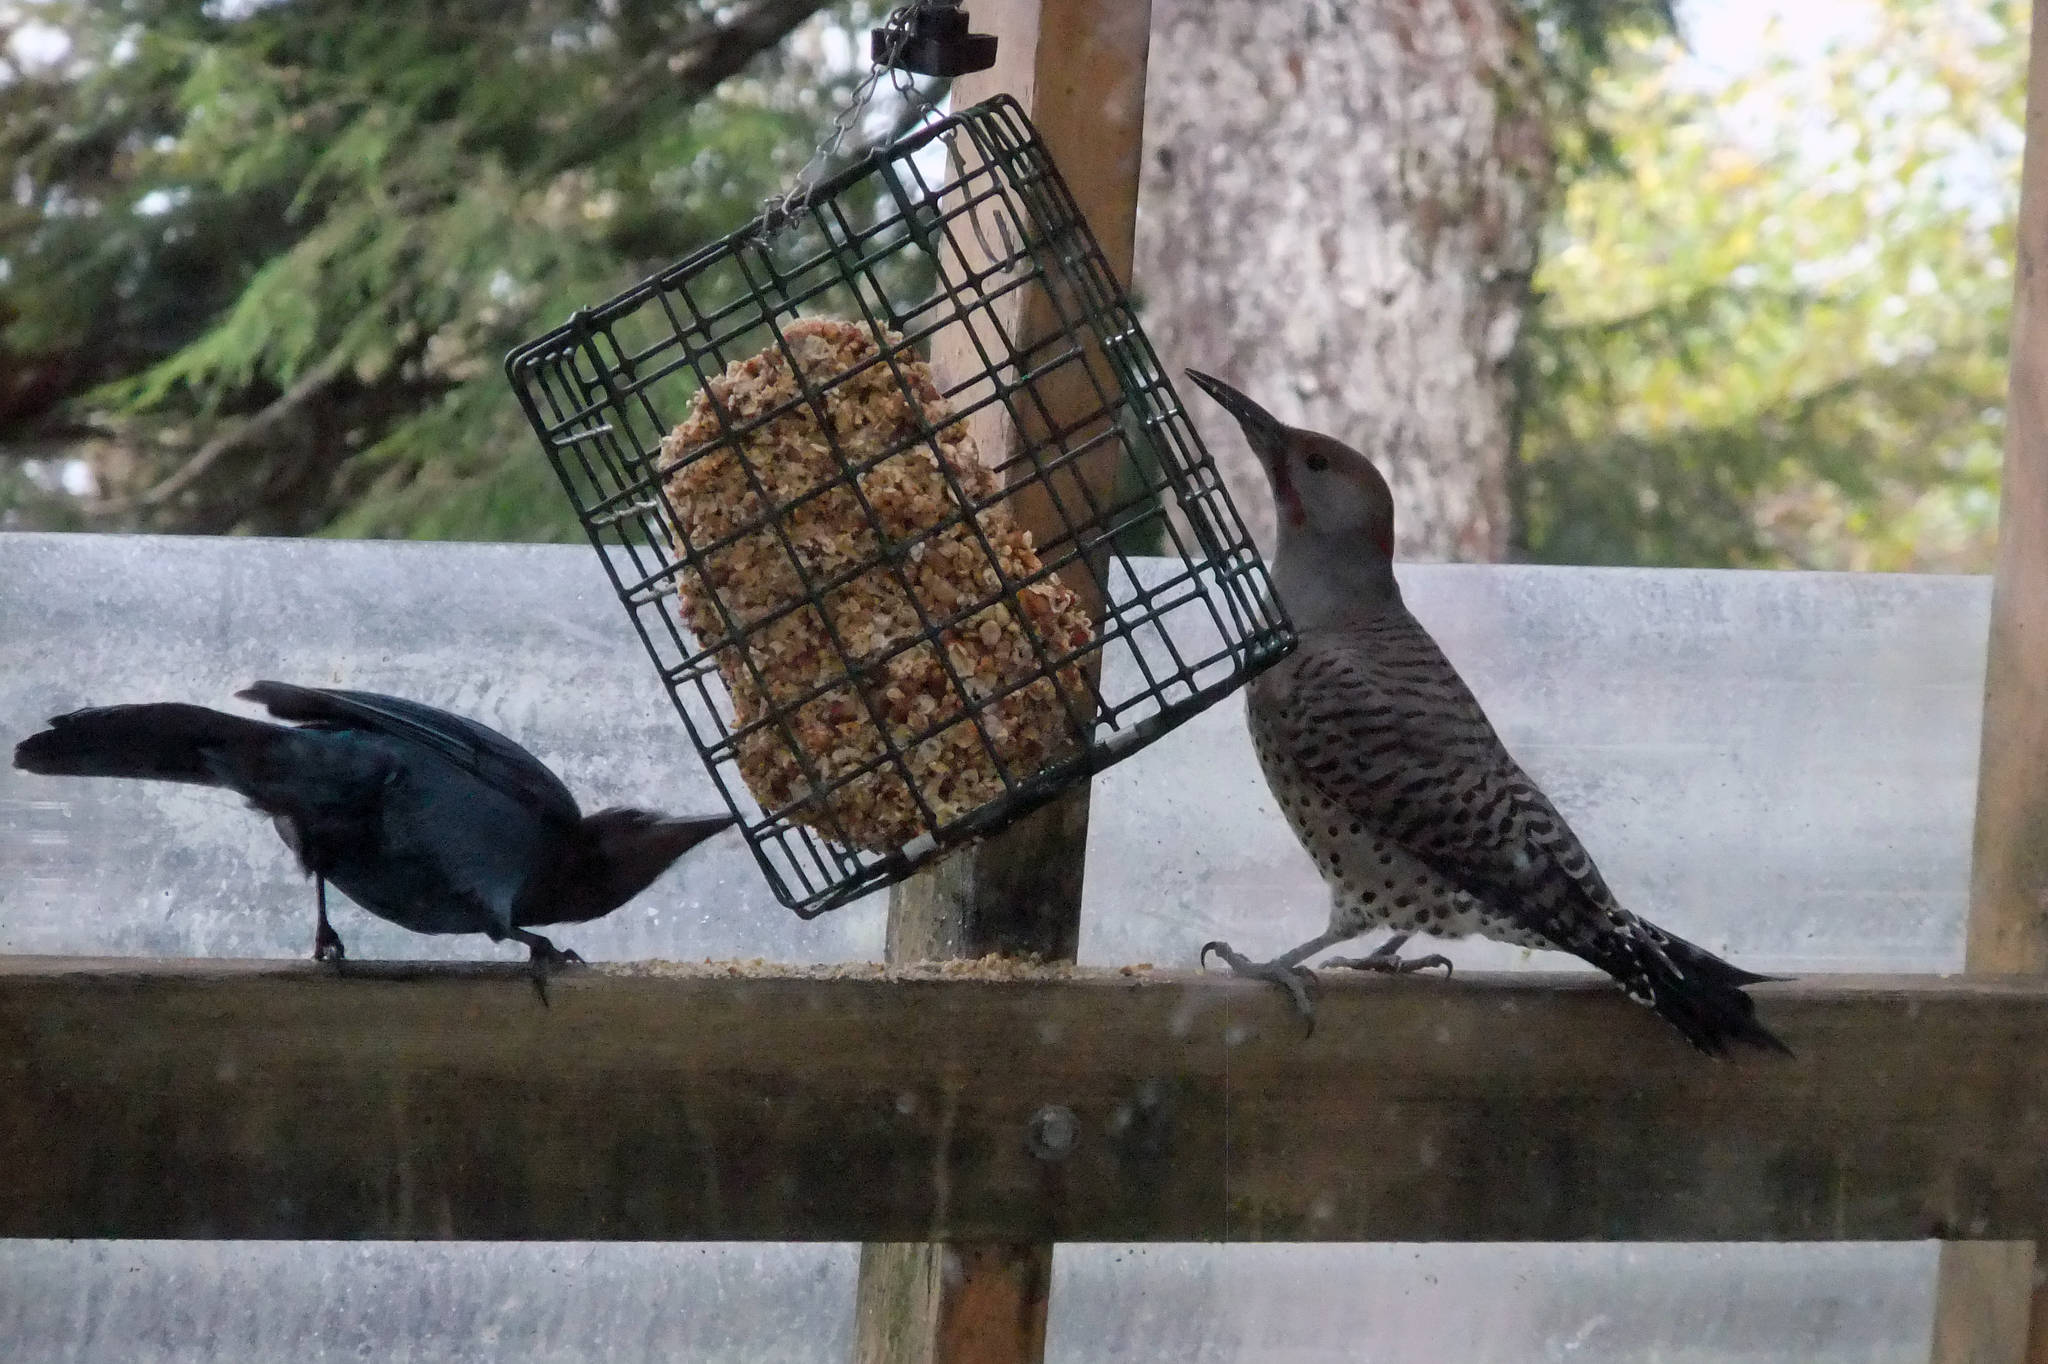 A flicker and bluejay feed together on Oct. 12. (Courtesy Photo / Gary Miller)